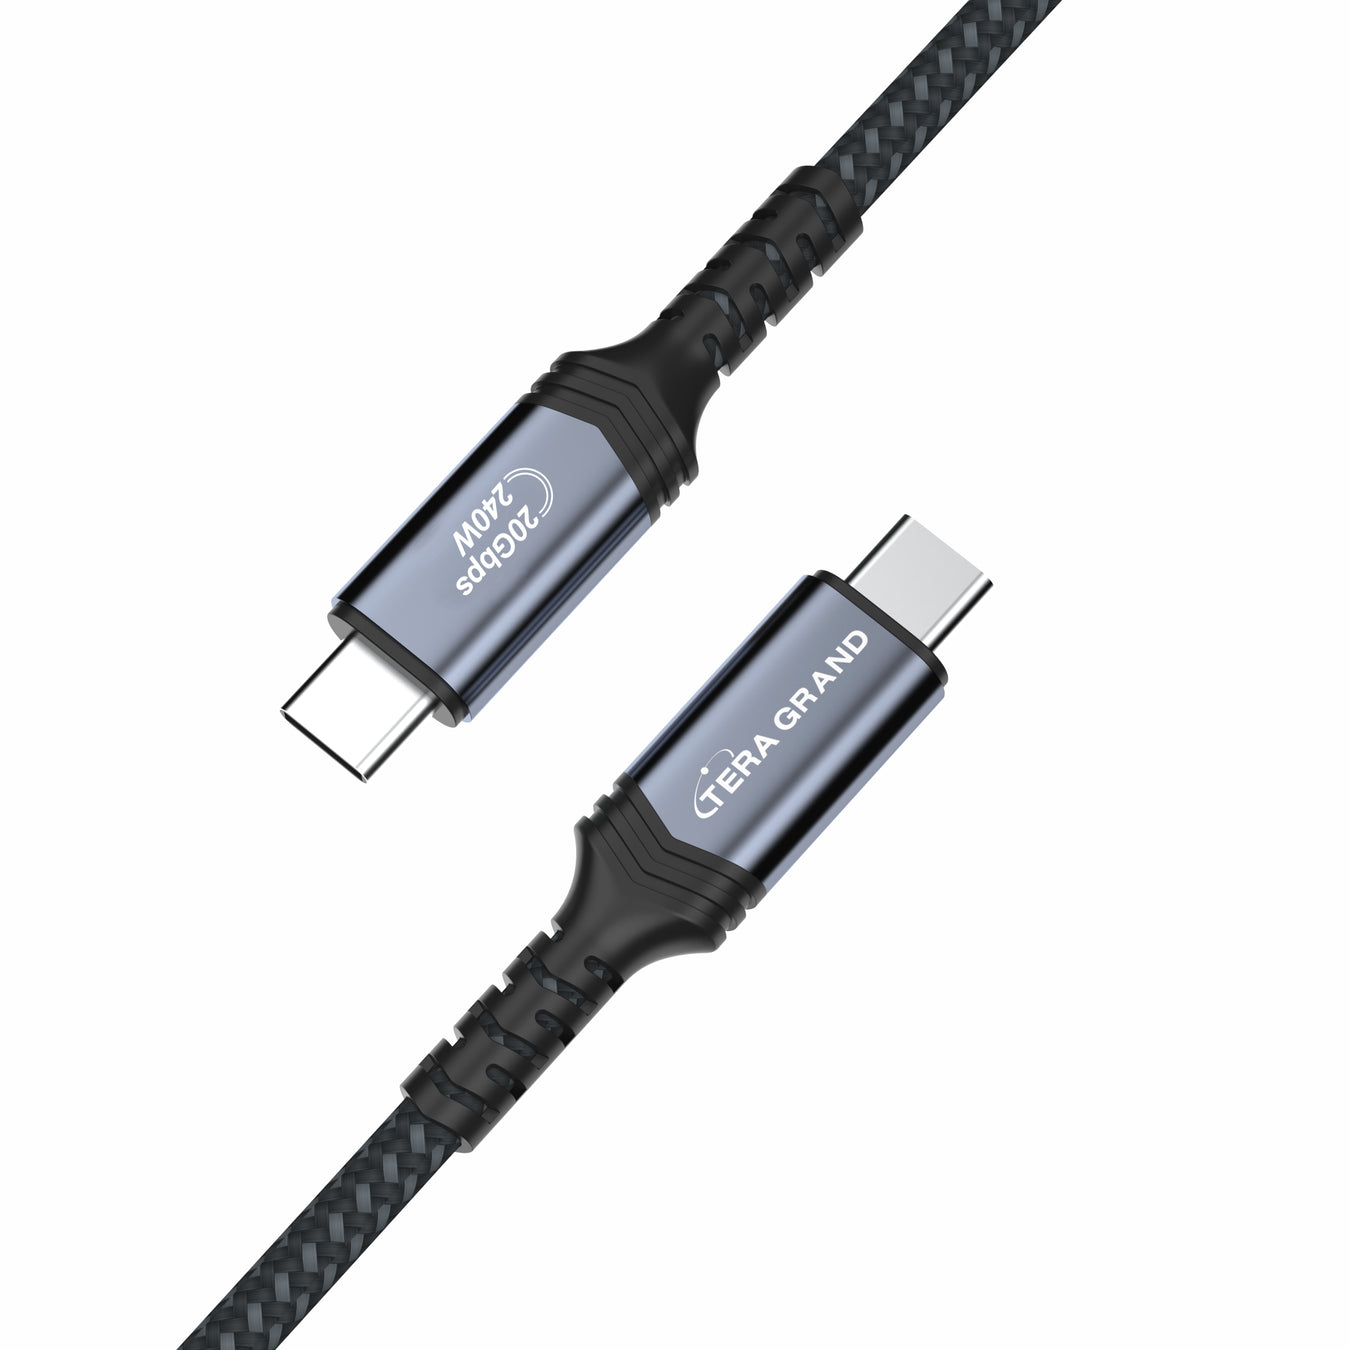 USB-C Cables and Adapters for Apple and Android Devices